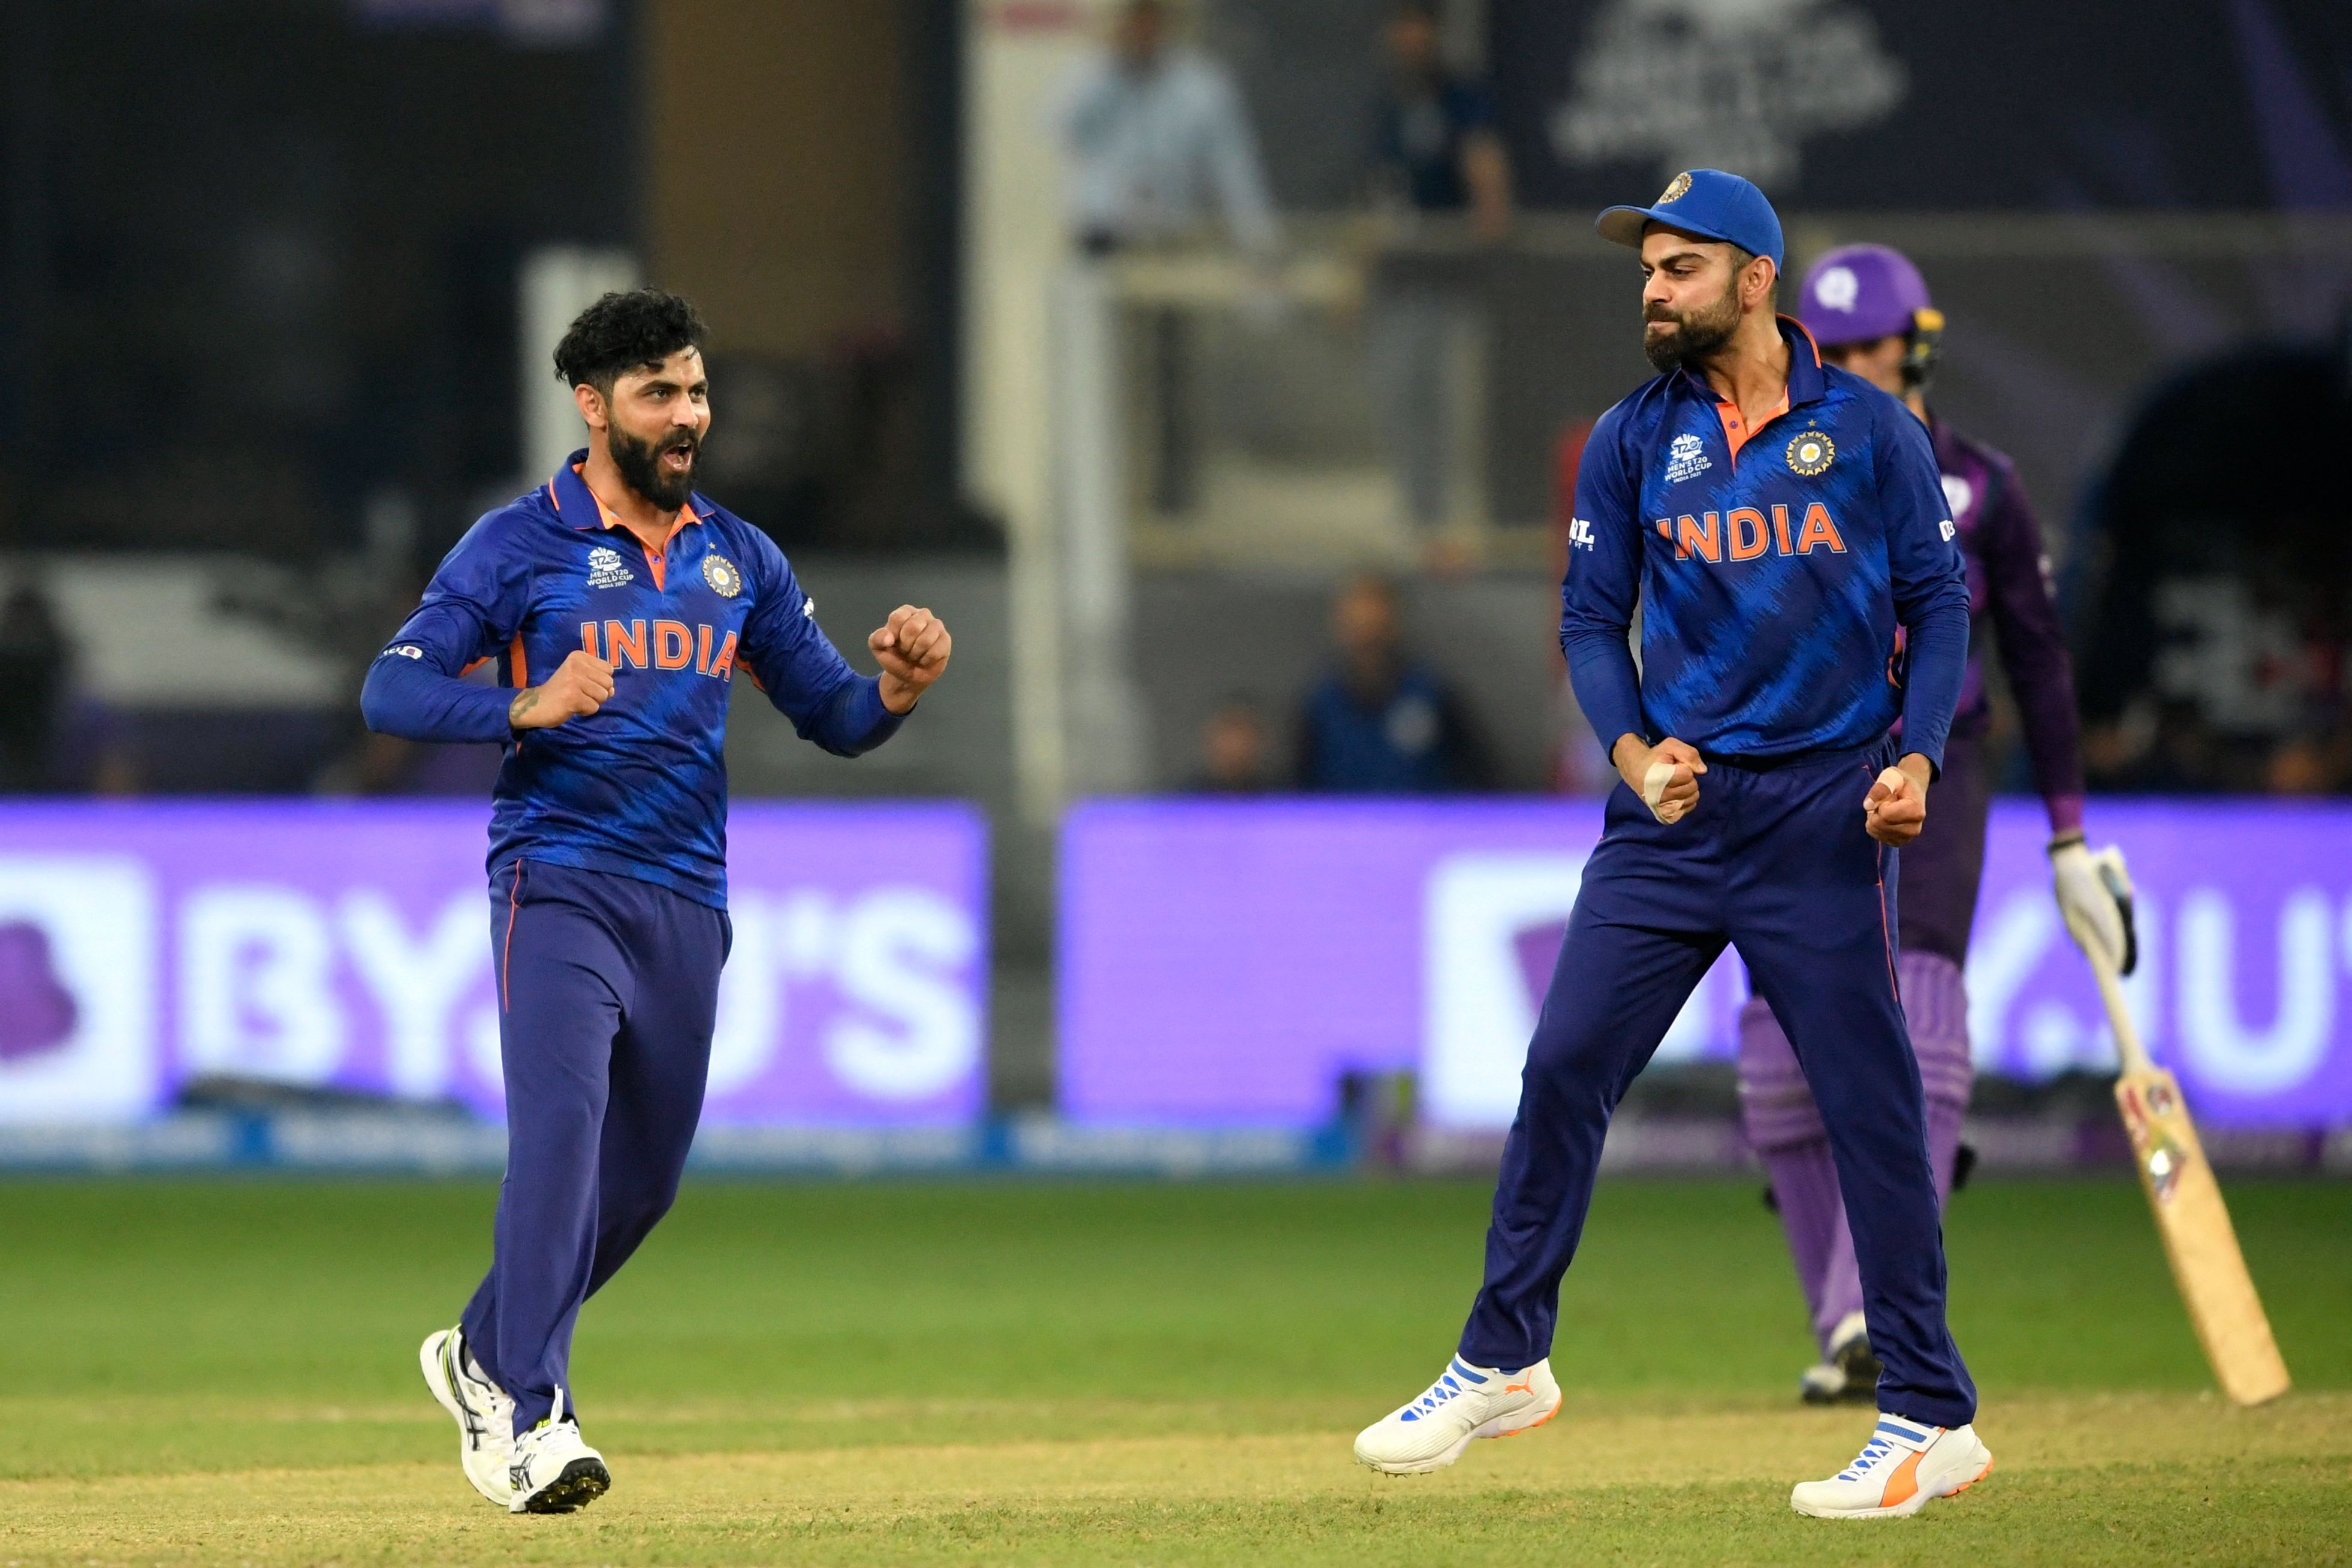 T20 World Cup | Glad to be back in our mojo, says Virat Kohli after India gun down 86 in 6.3 overs vs Scotland 